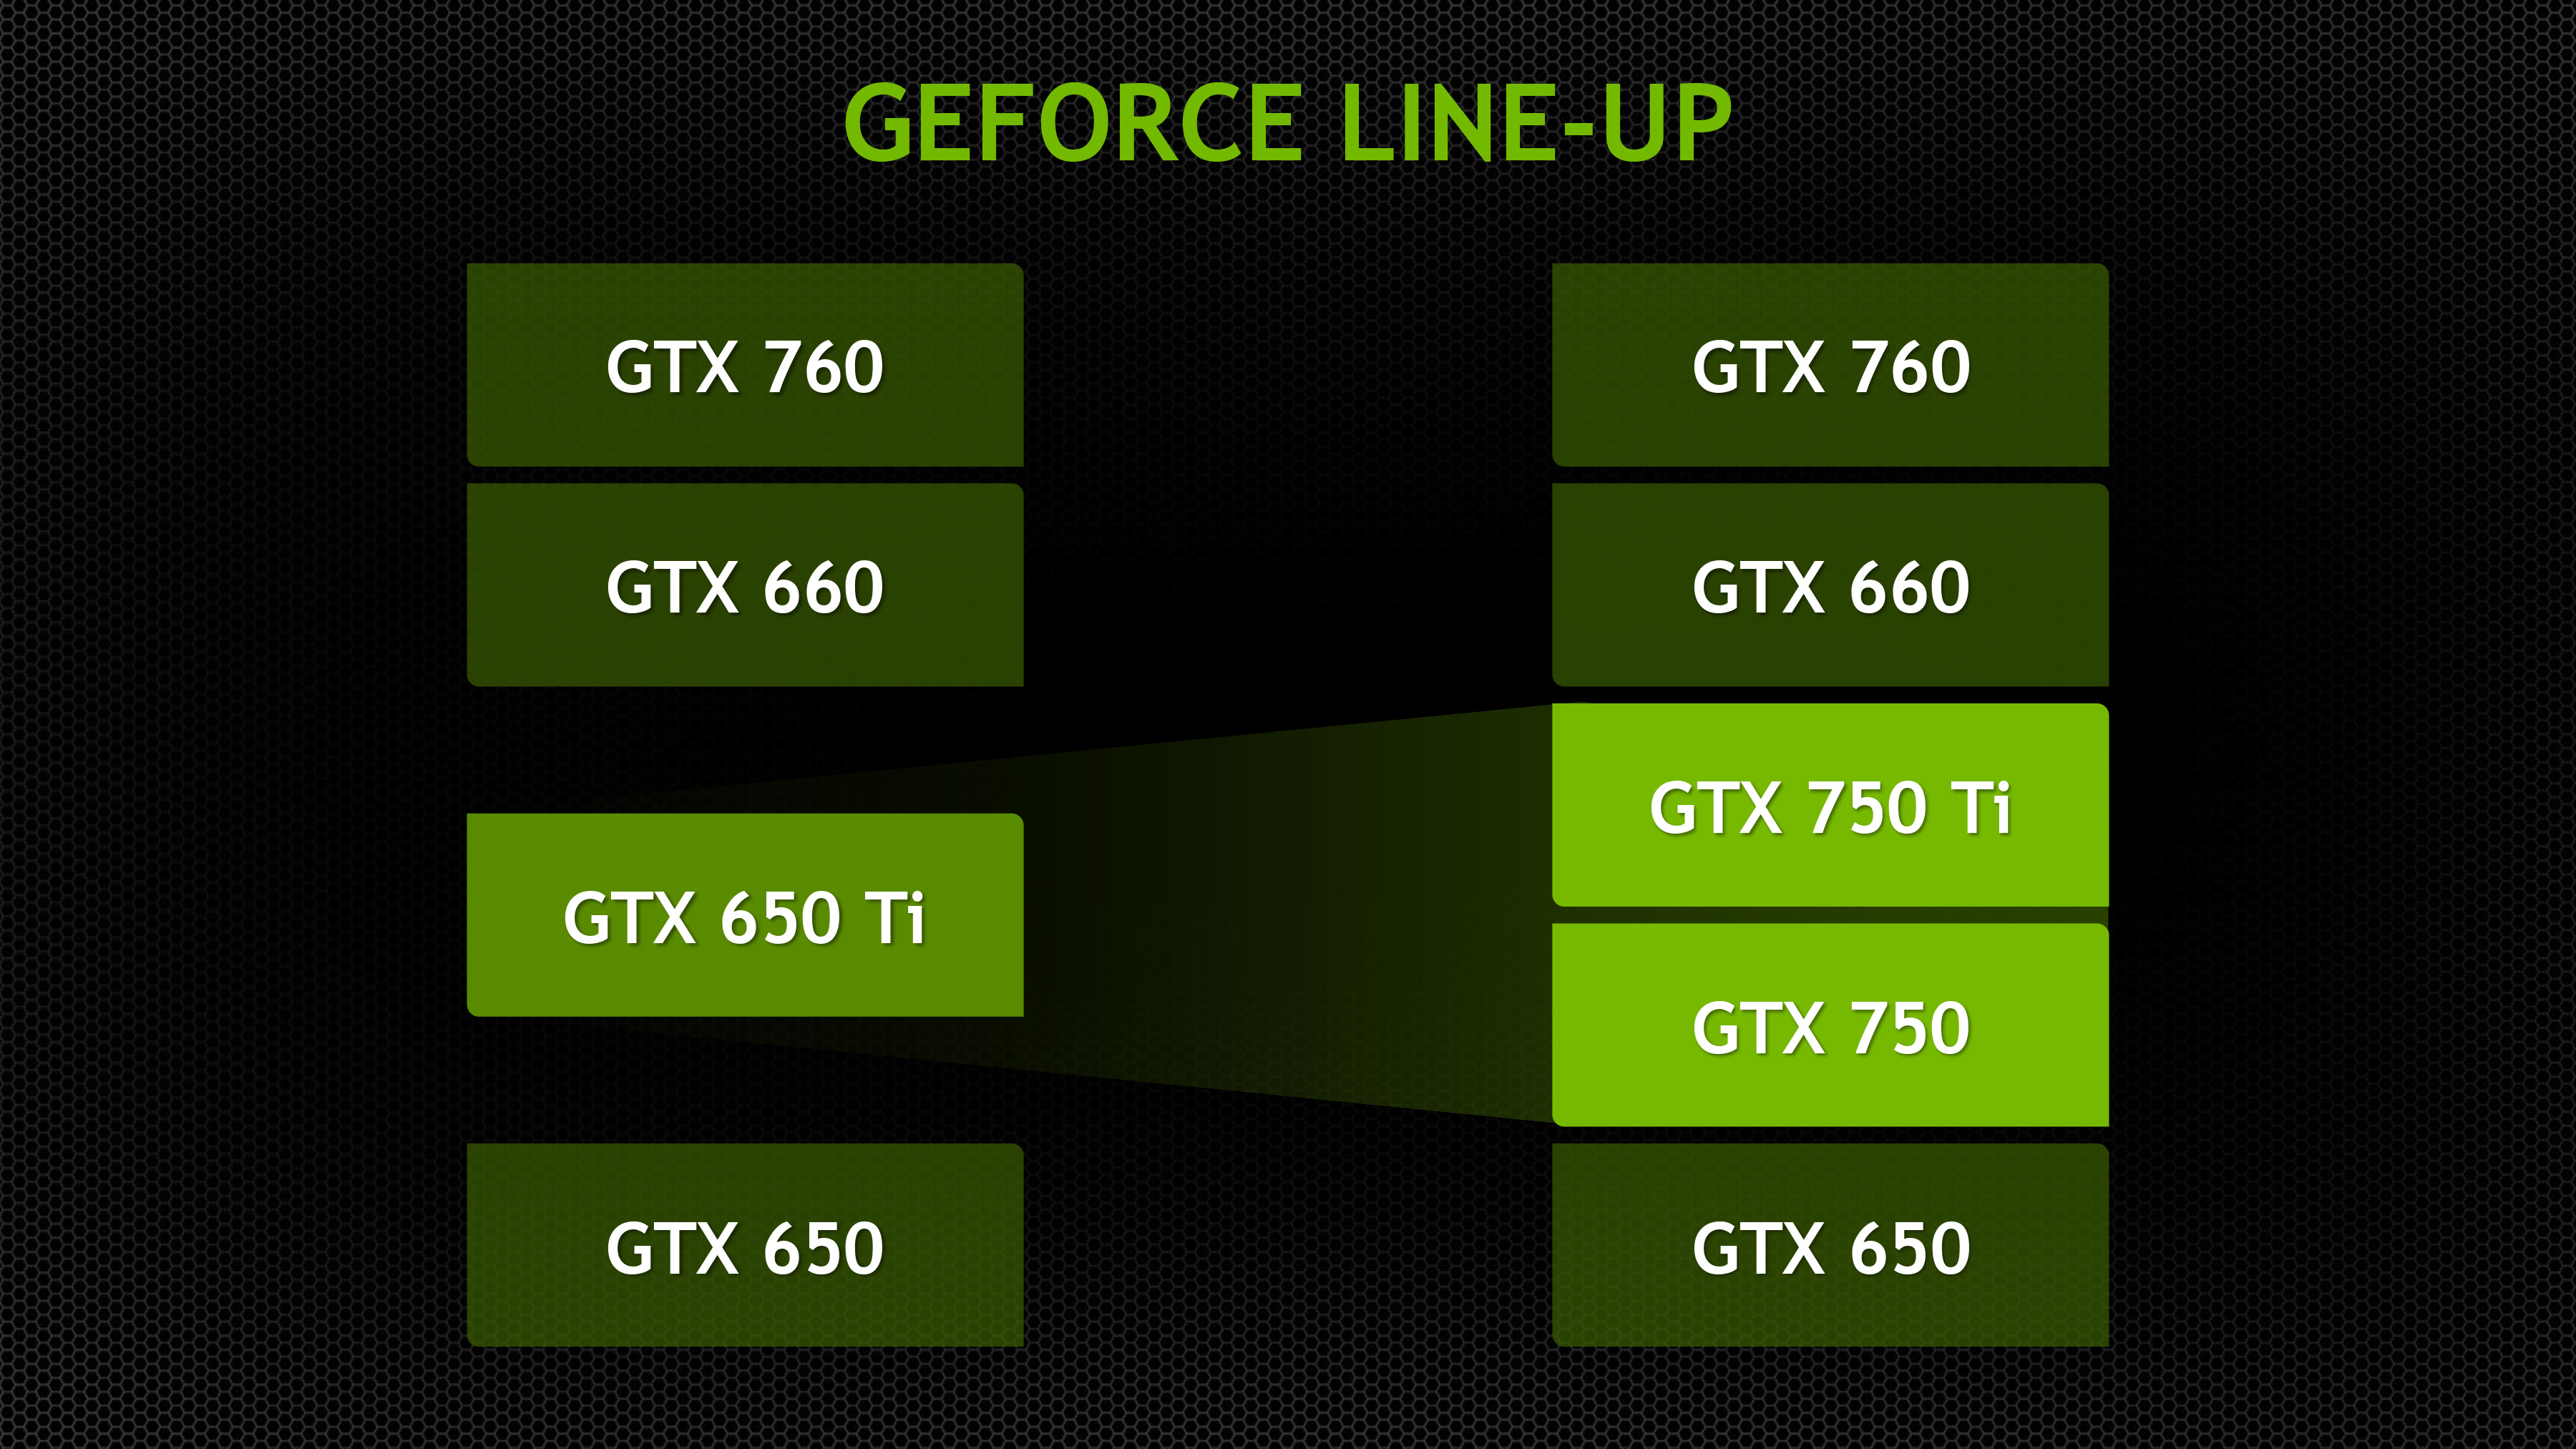 Geforce Gtx 750 Ti Gtx 750 Specifications Positioning The Nvidia Geforce Gtx 750 Ti And Gtx 750 Review Maxwell Makes Its Move